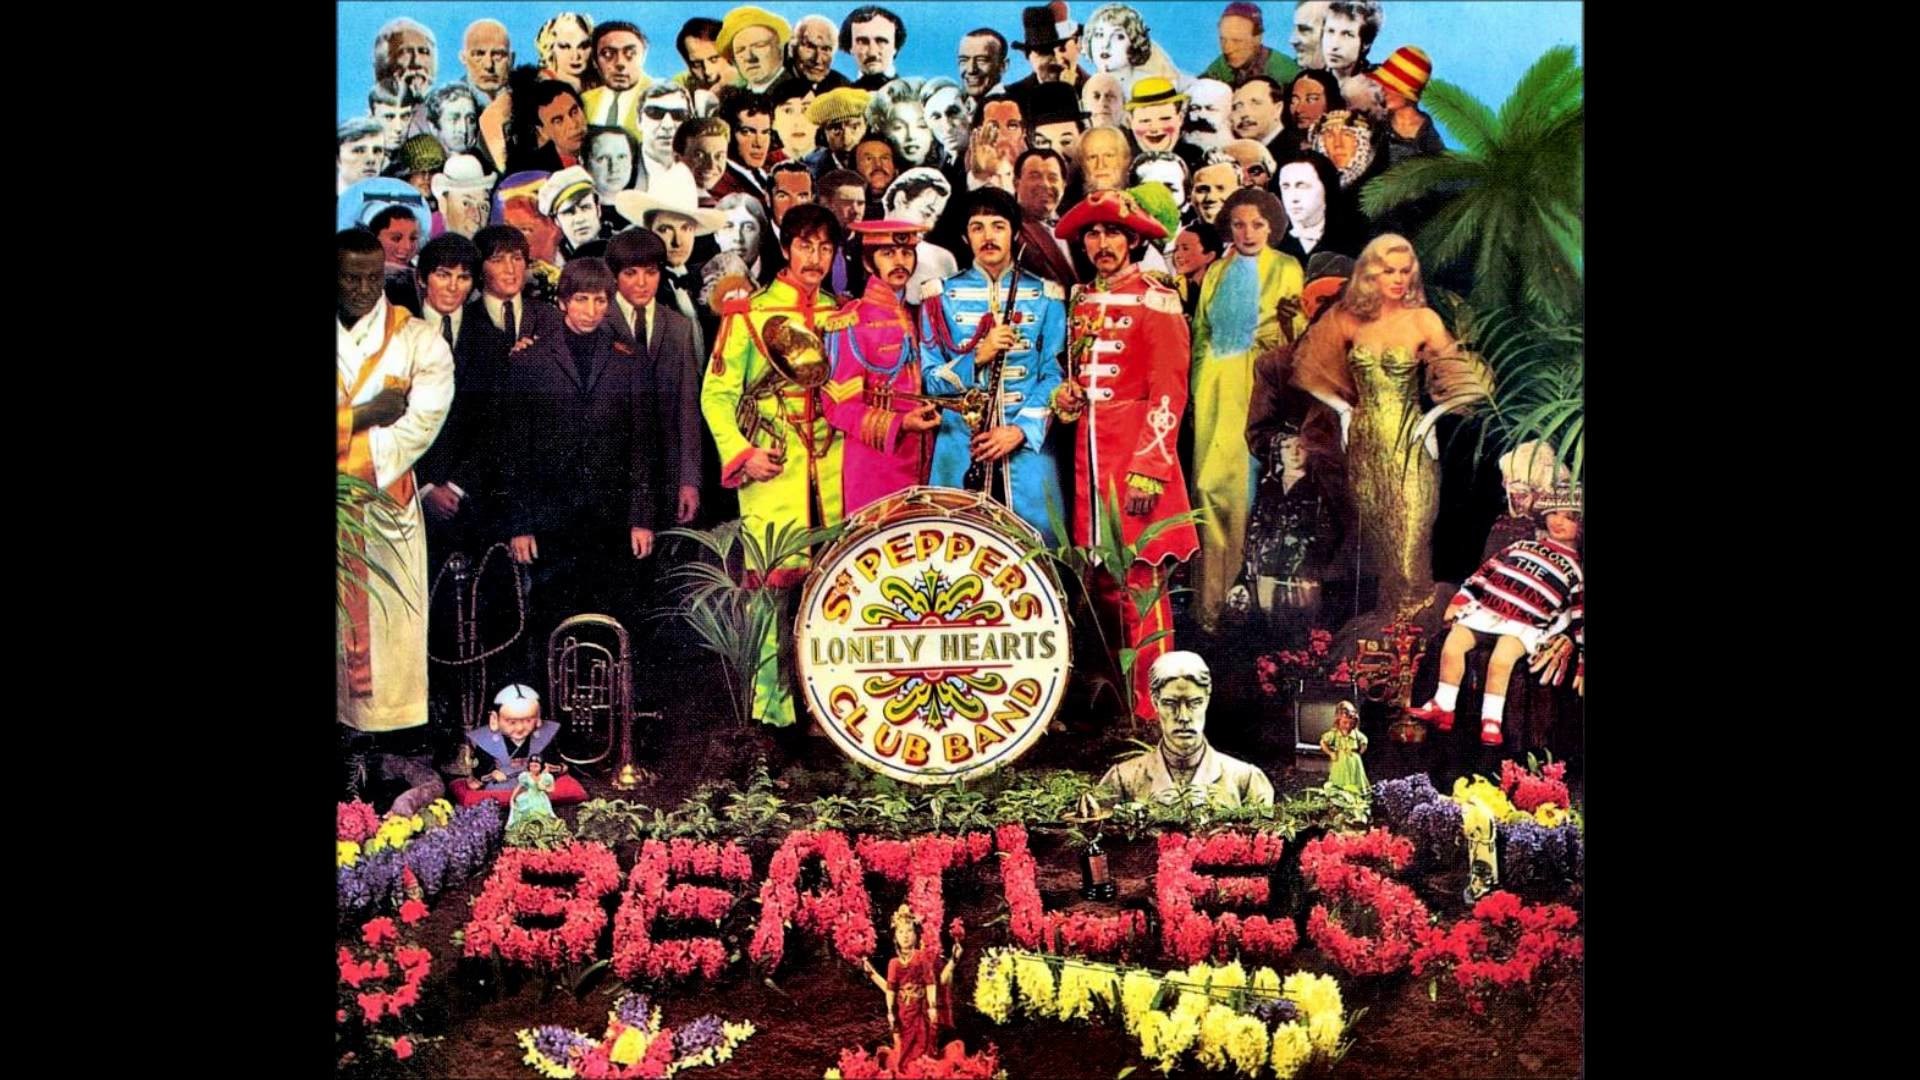 1920x1080 The Beatles - Sgt Pepper's Lonely Hearts Club Band (Album Download)